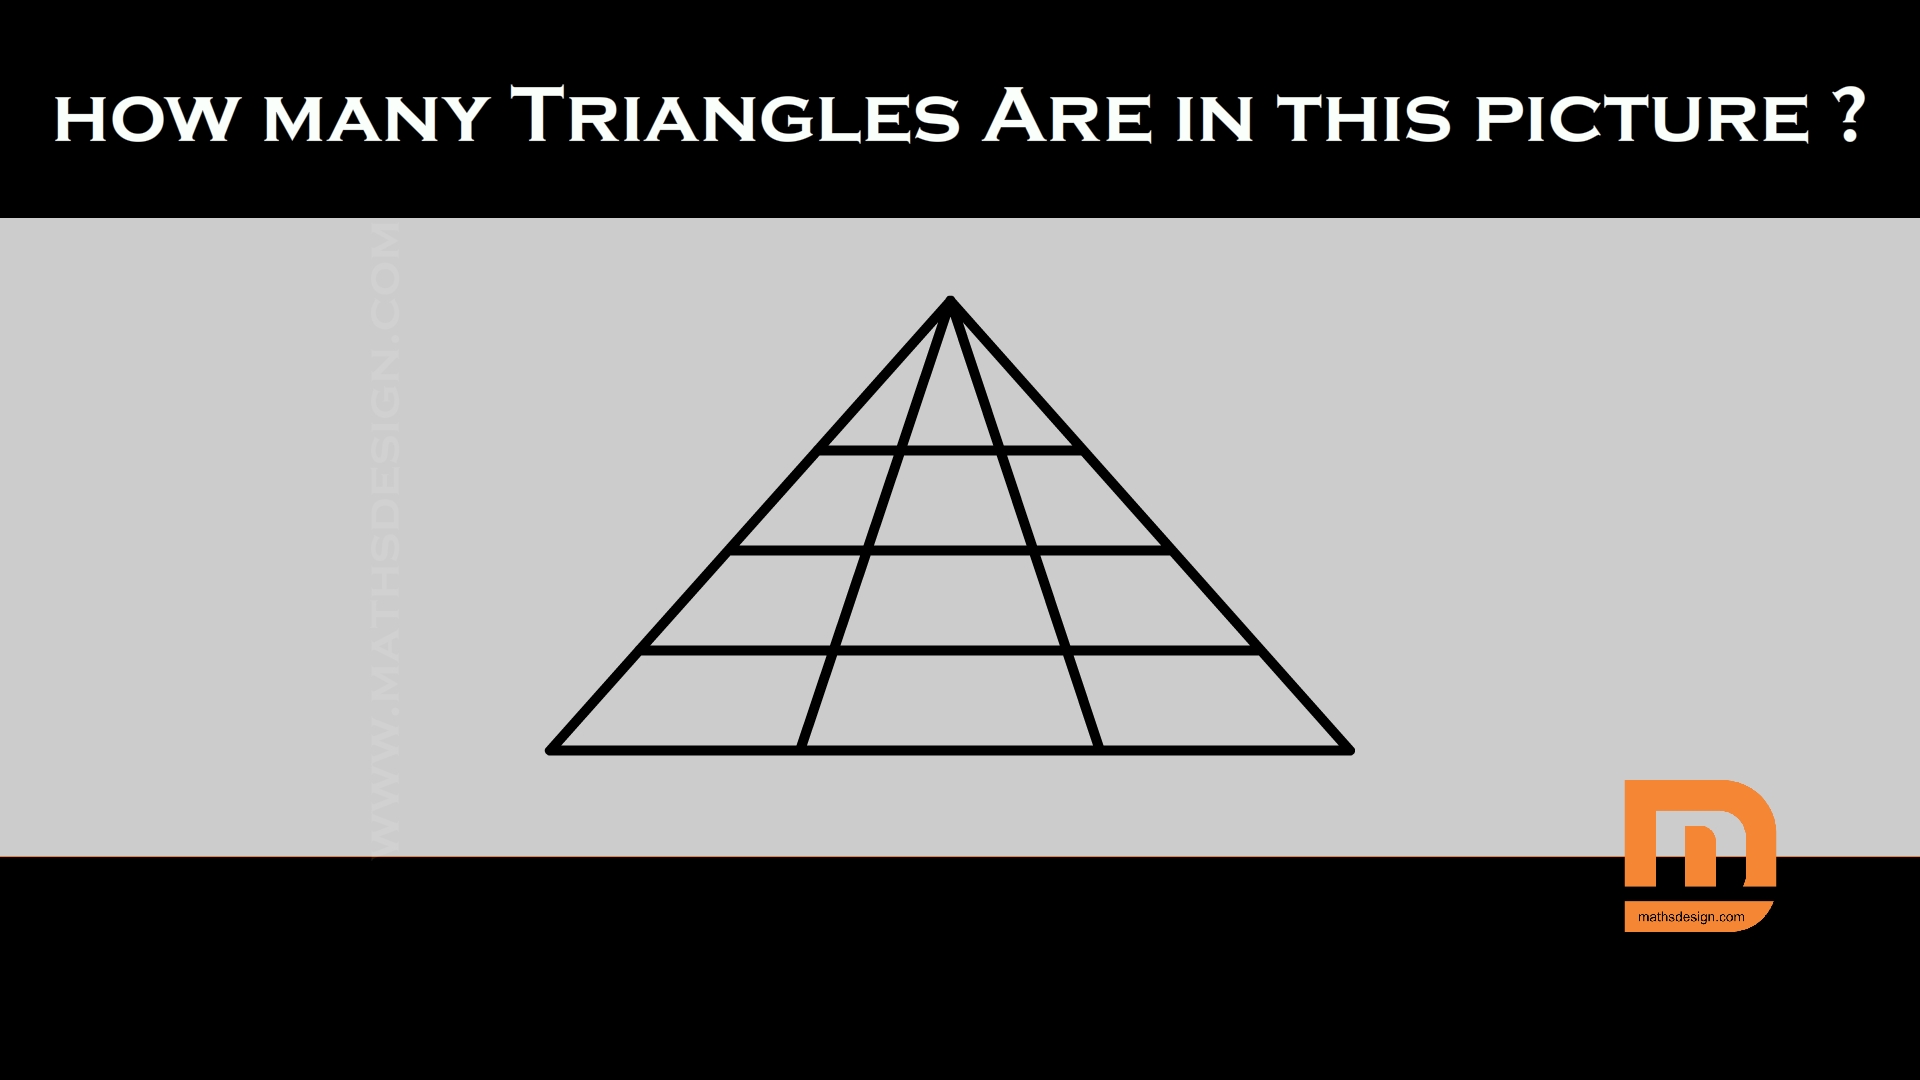 how-many-triangles-math-puzzles-iq-riddles-brain-teasers-md